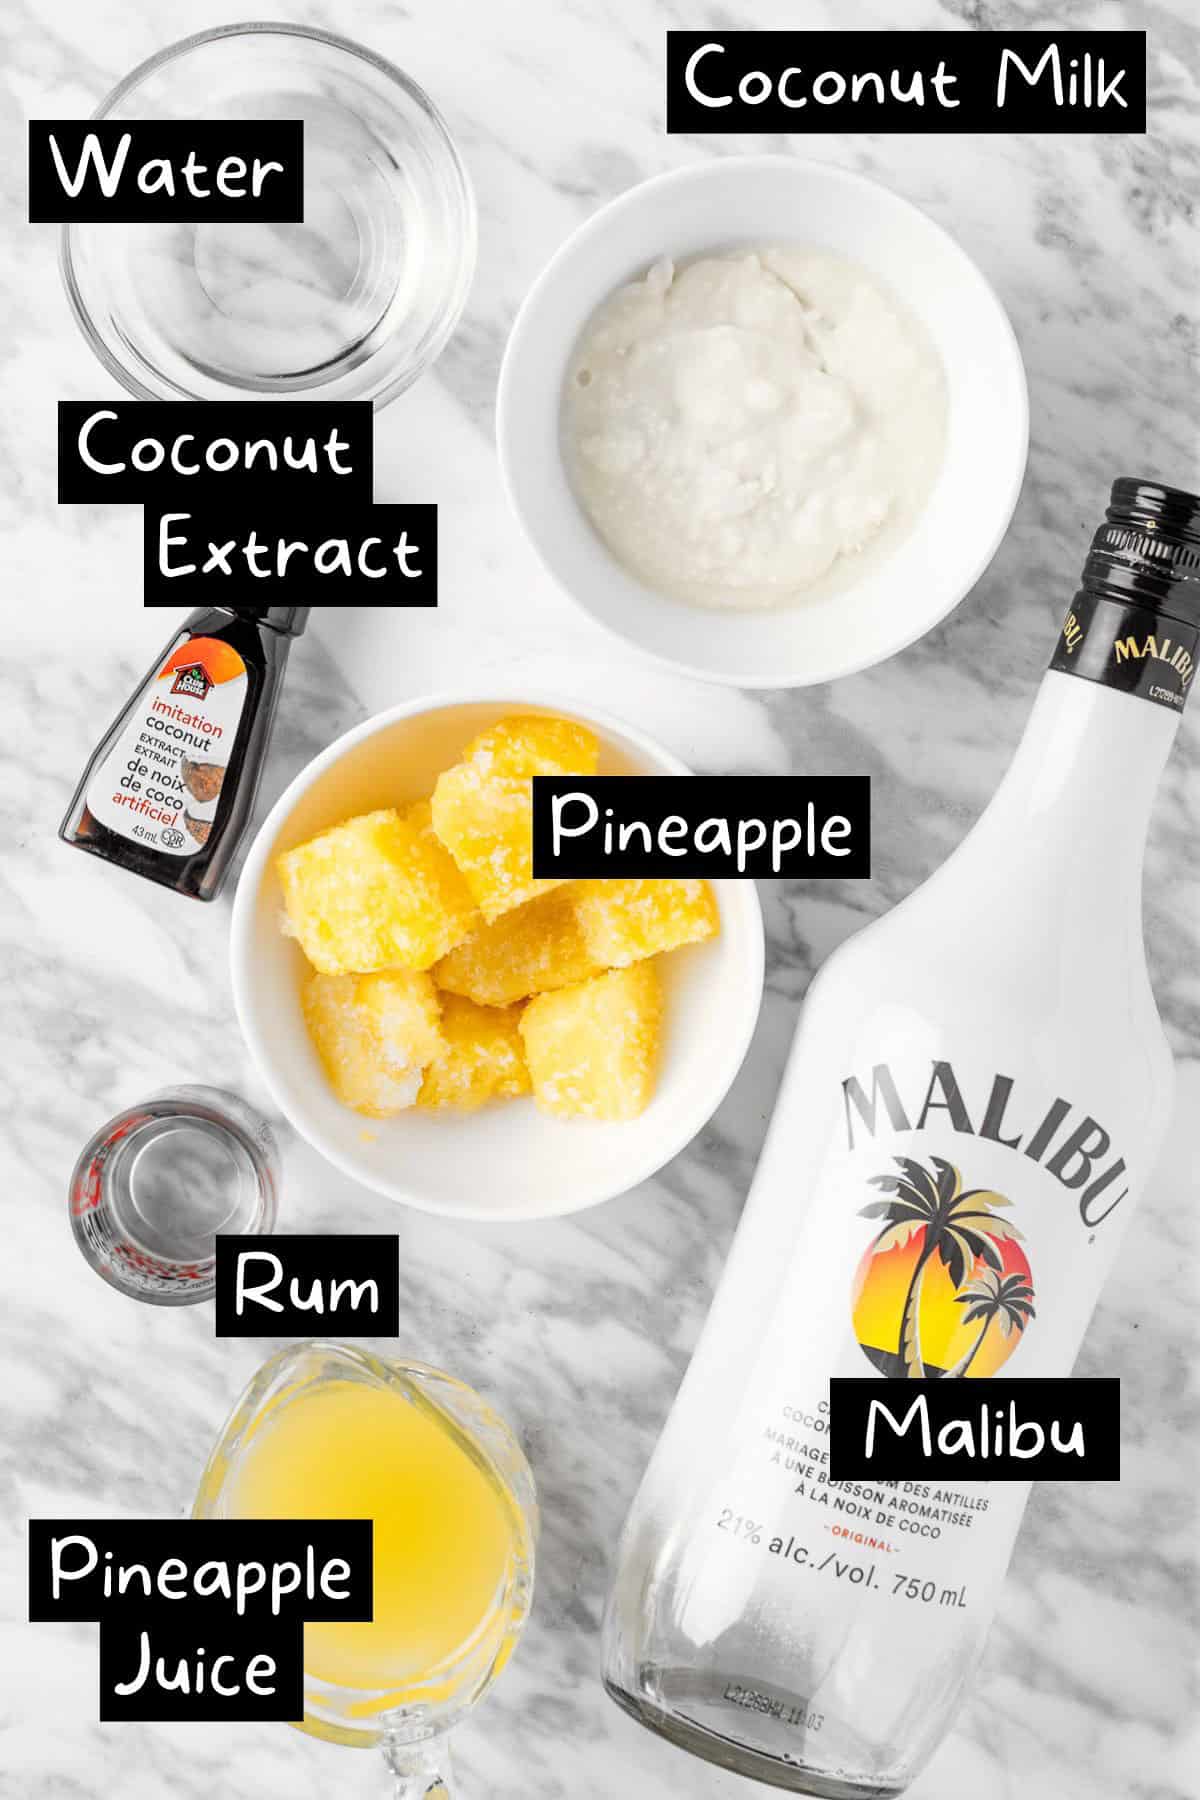 The ingredients needed to make the pina colada.